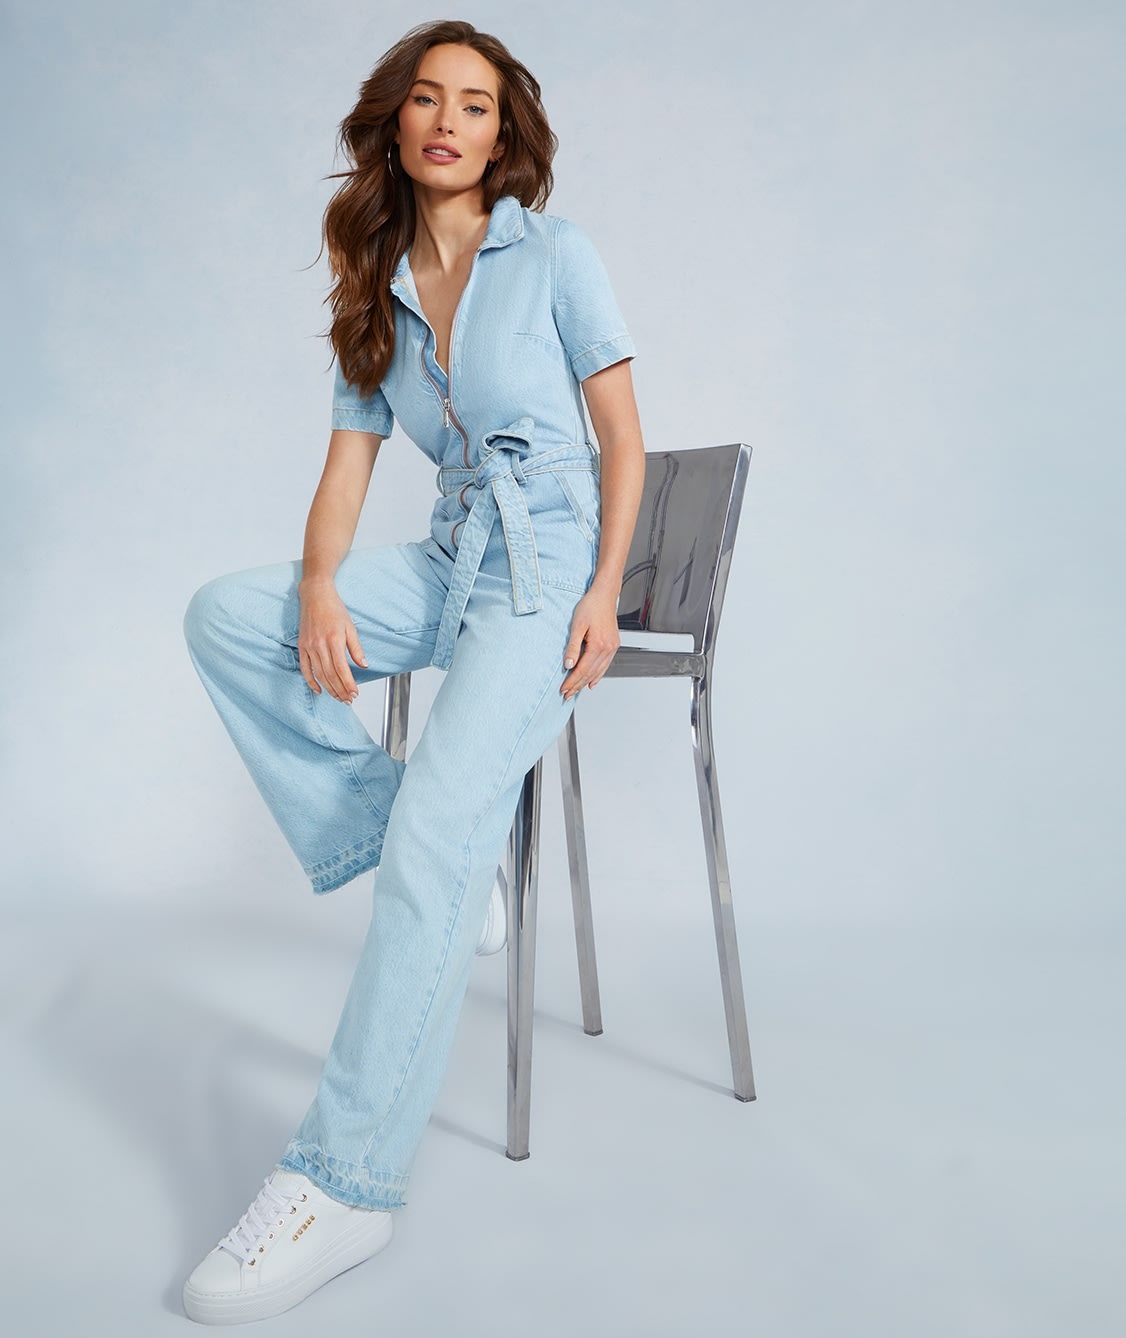 Explore iconic denim in one-pieces and jeans.